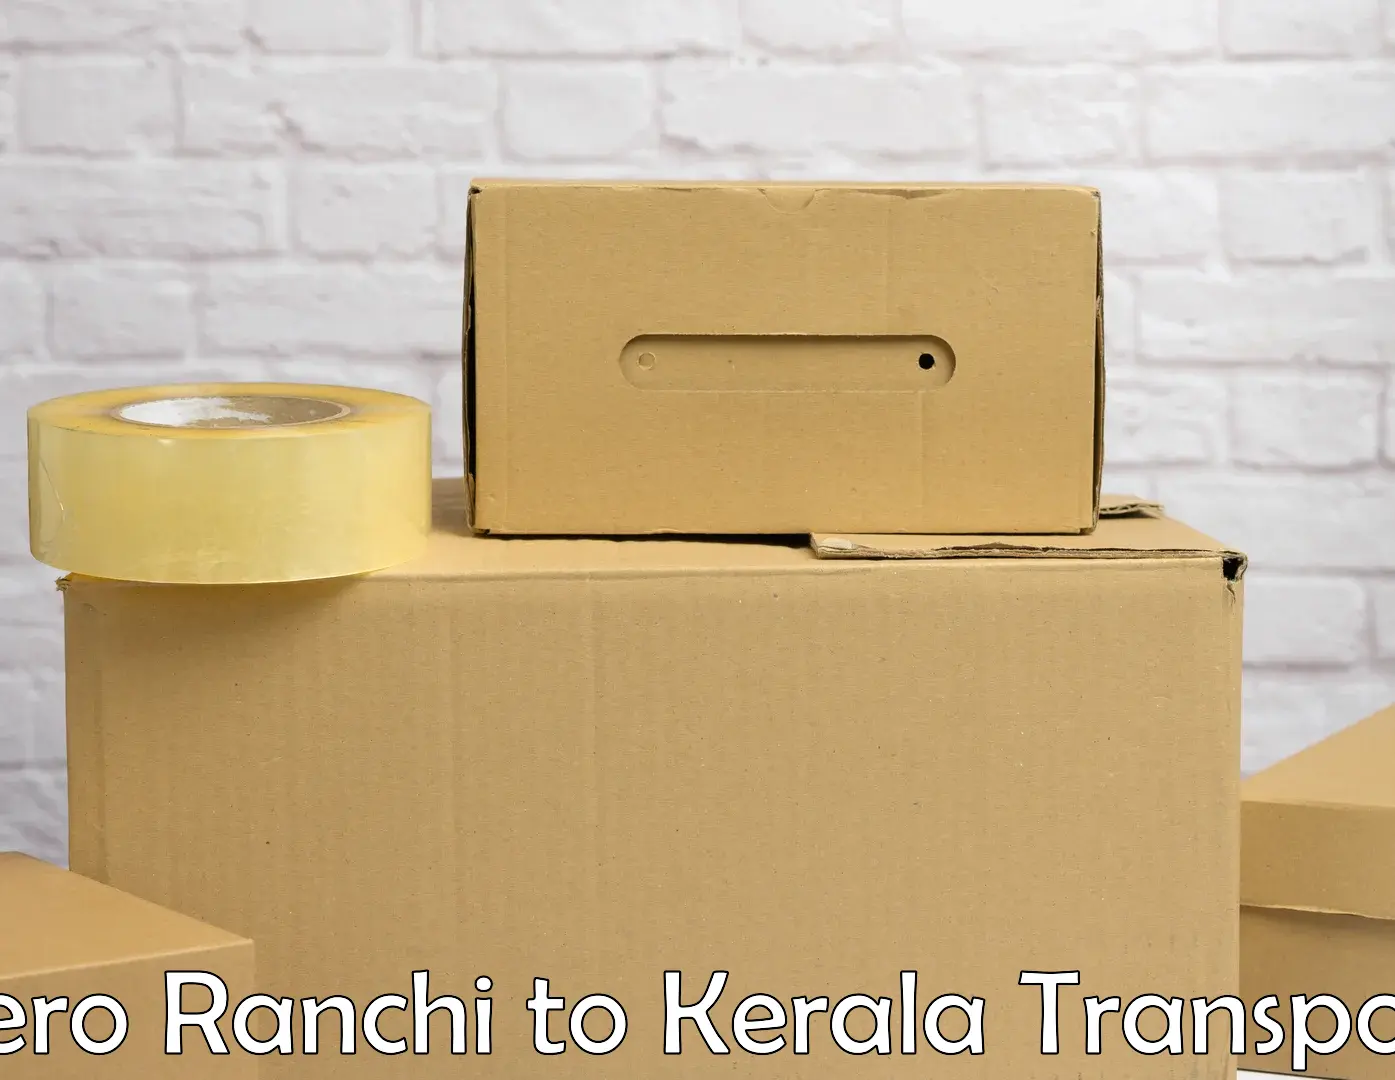 Online transport booking in Bero Ranchi to Thalassery